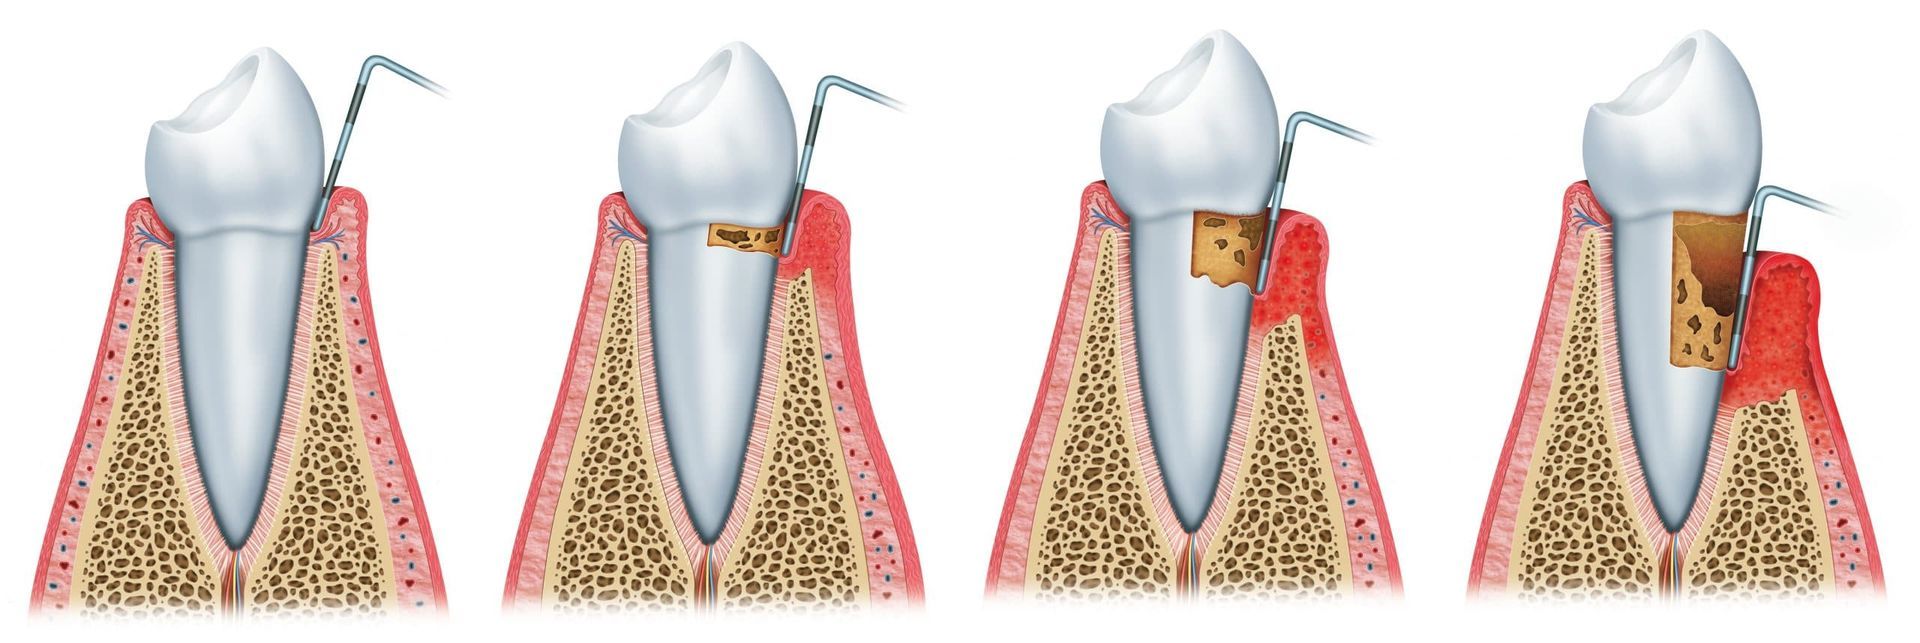 A diagram showing the stages of tooth decay